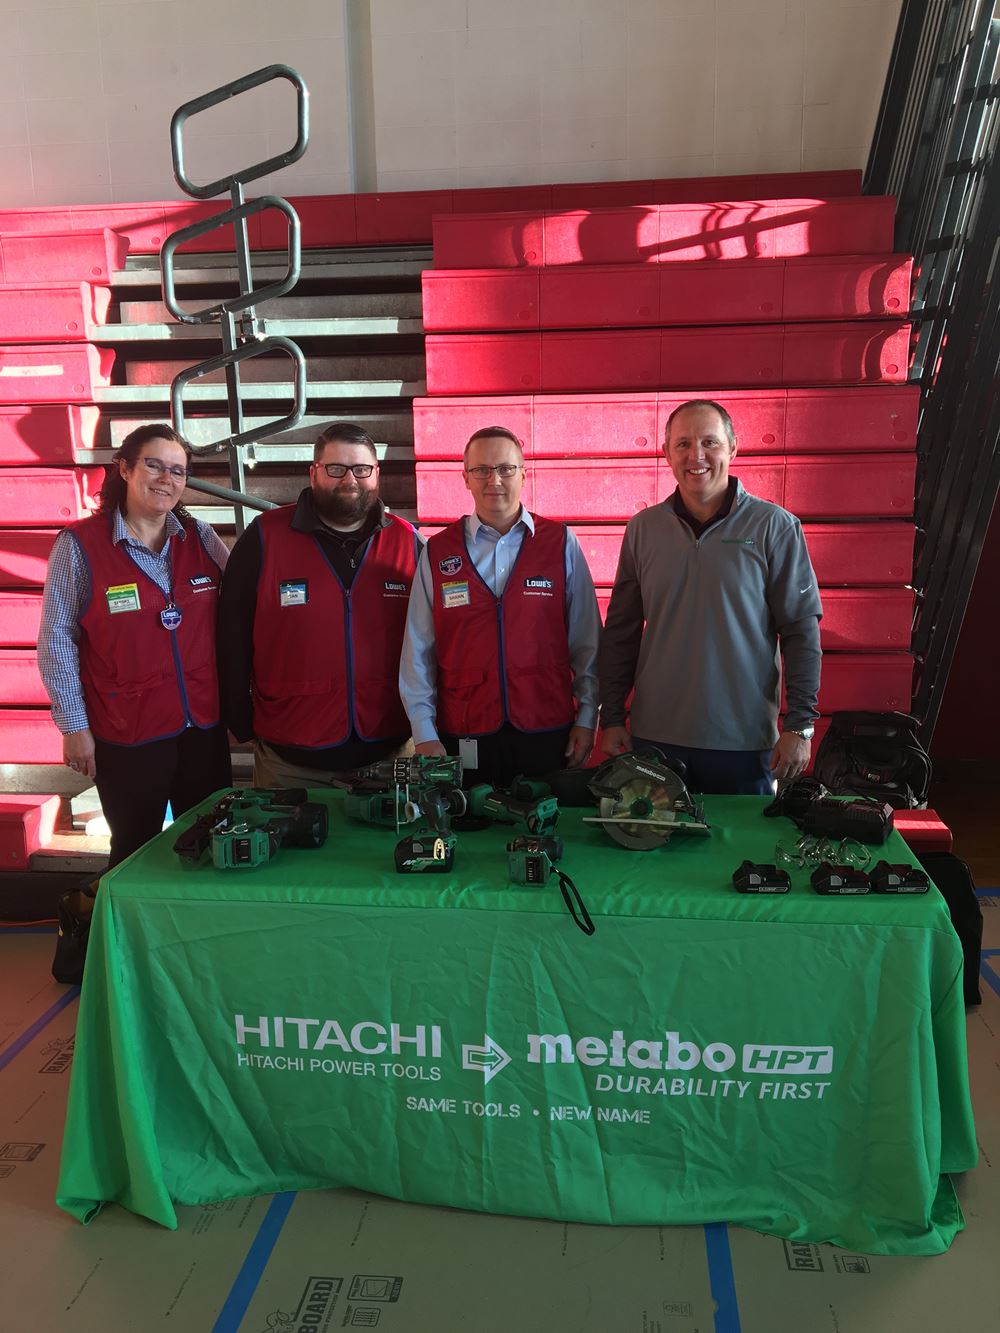 Metabo HPT joins more than 60 Gen T organizations across the country who are facilitating the education and training needed to populate the skilled trades industry, close the job skills gap and shape a new perception of the skilled trades.